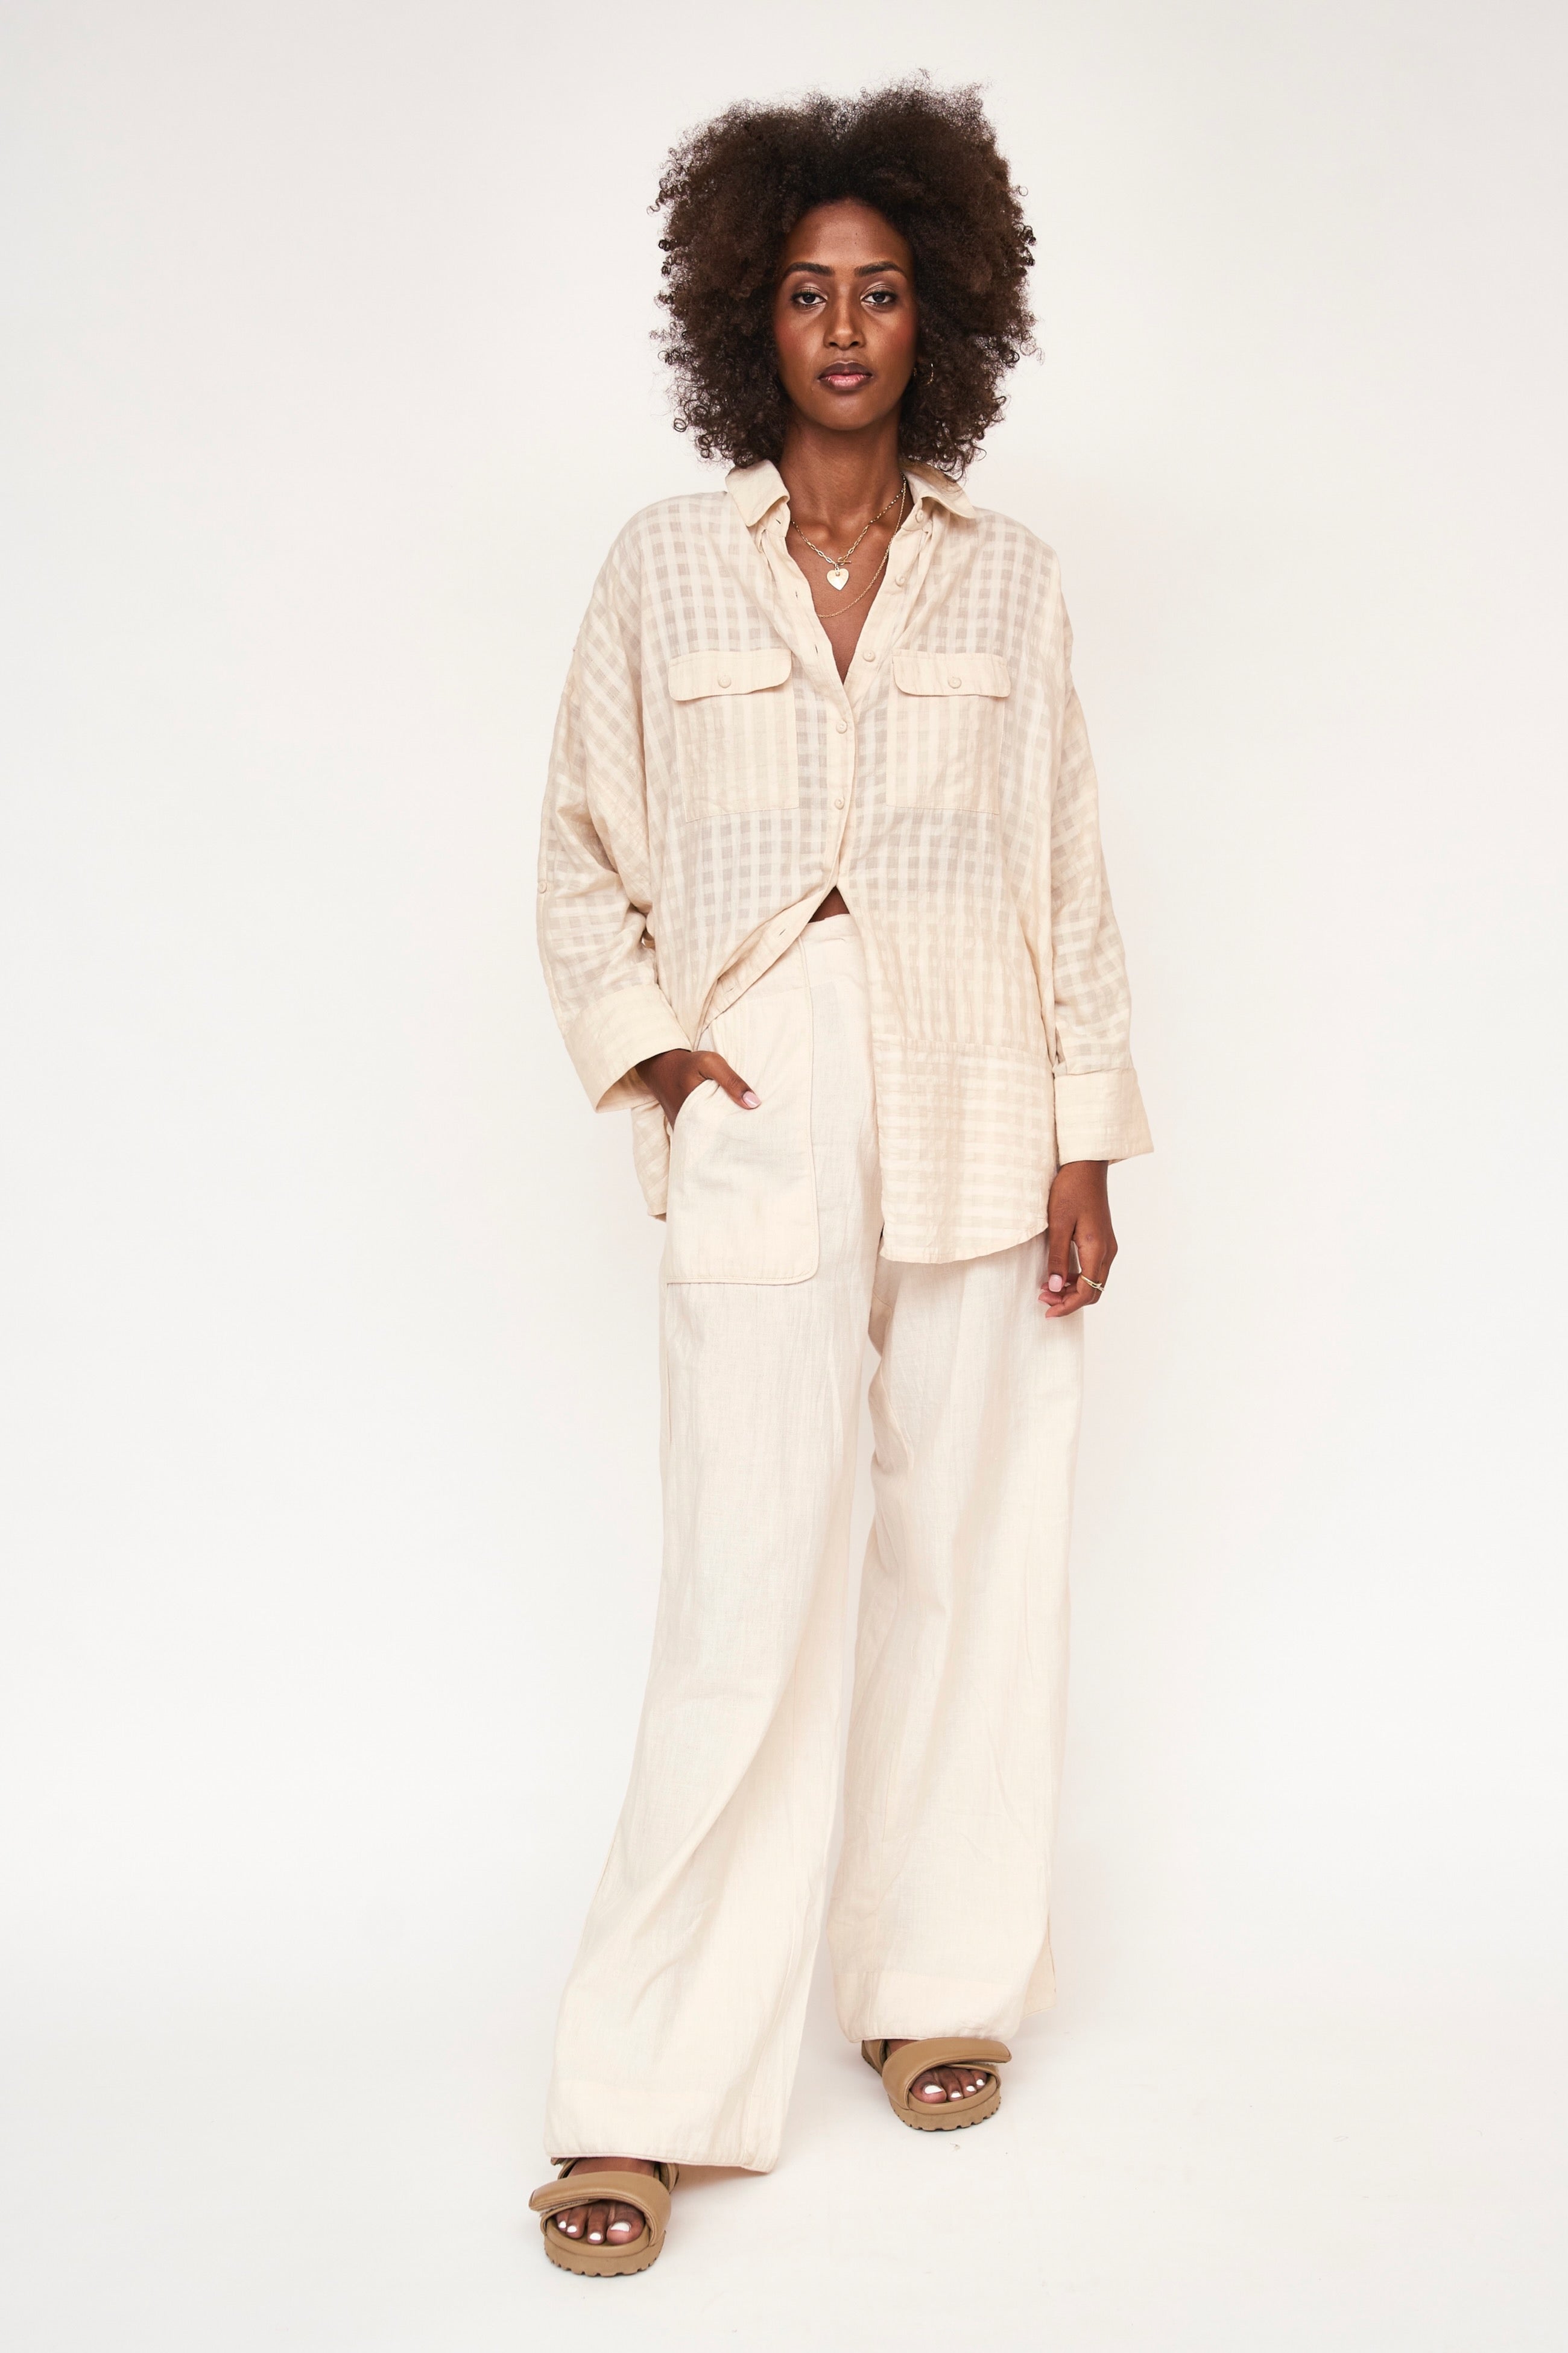 Girl wearing MIRTH women's button up long sleeve kyoto shirt in parchment boxweave cream cotton